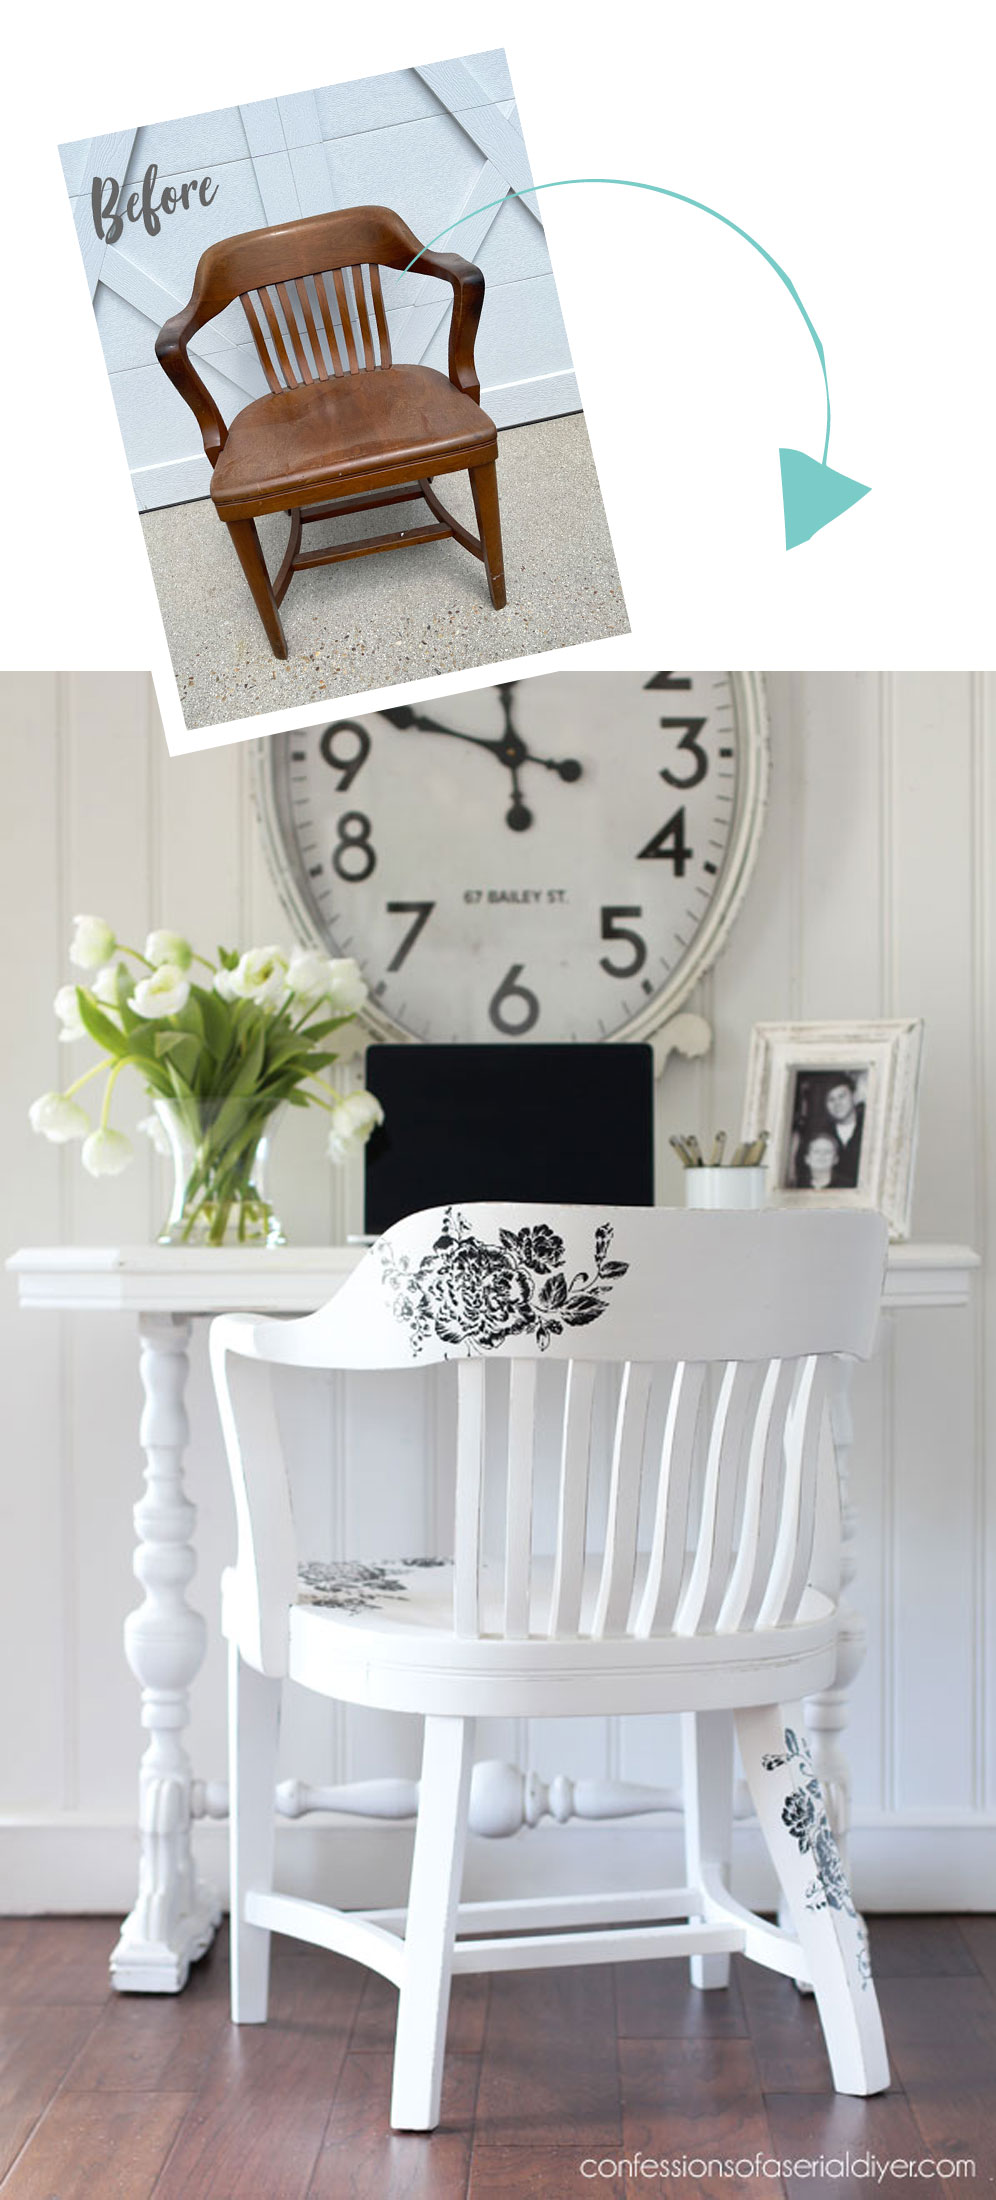 Vintage Banker's Chair Makeover wth stencil